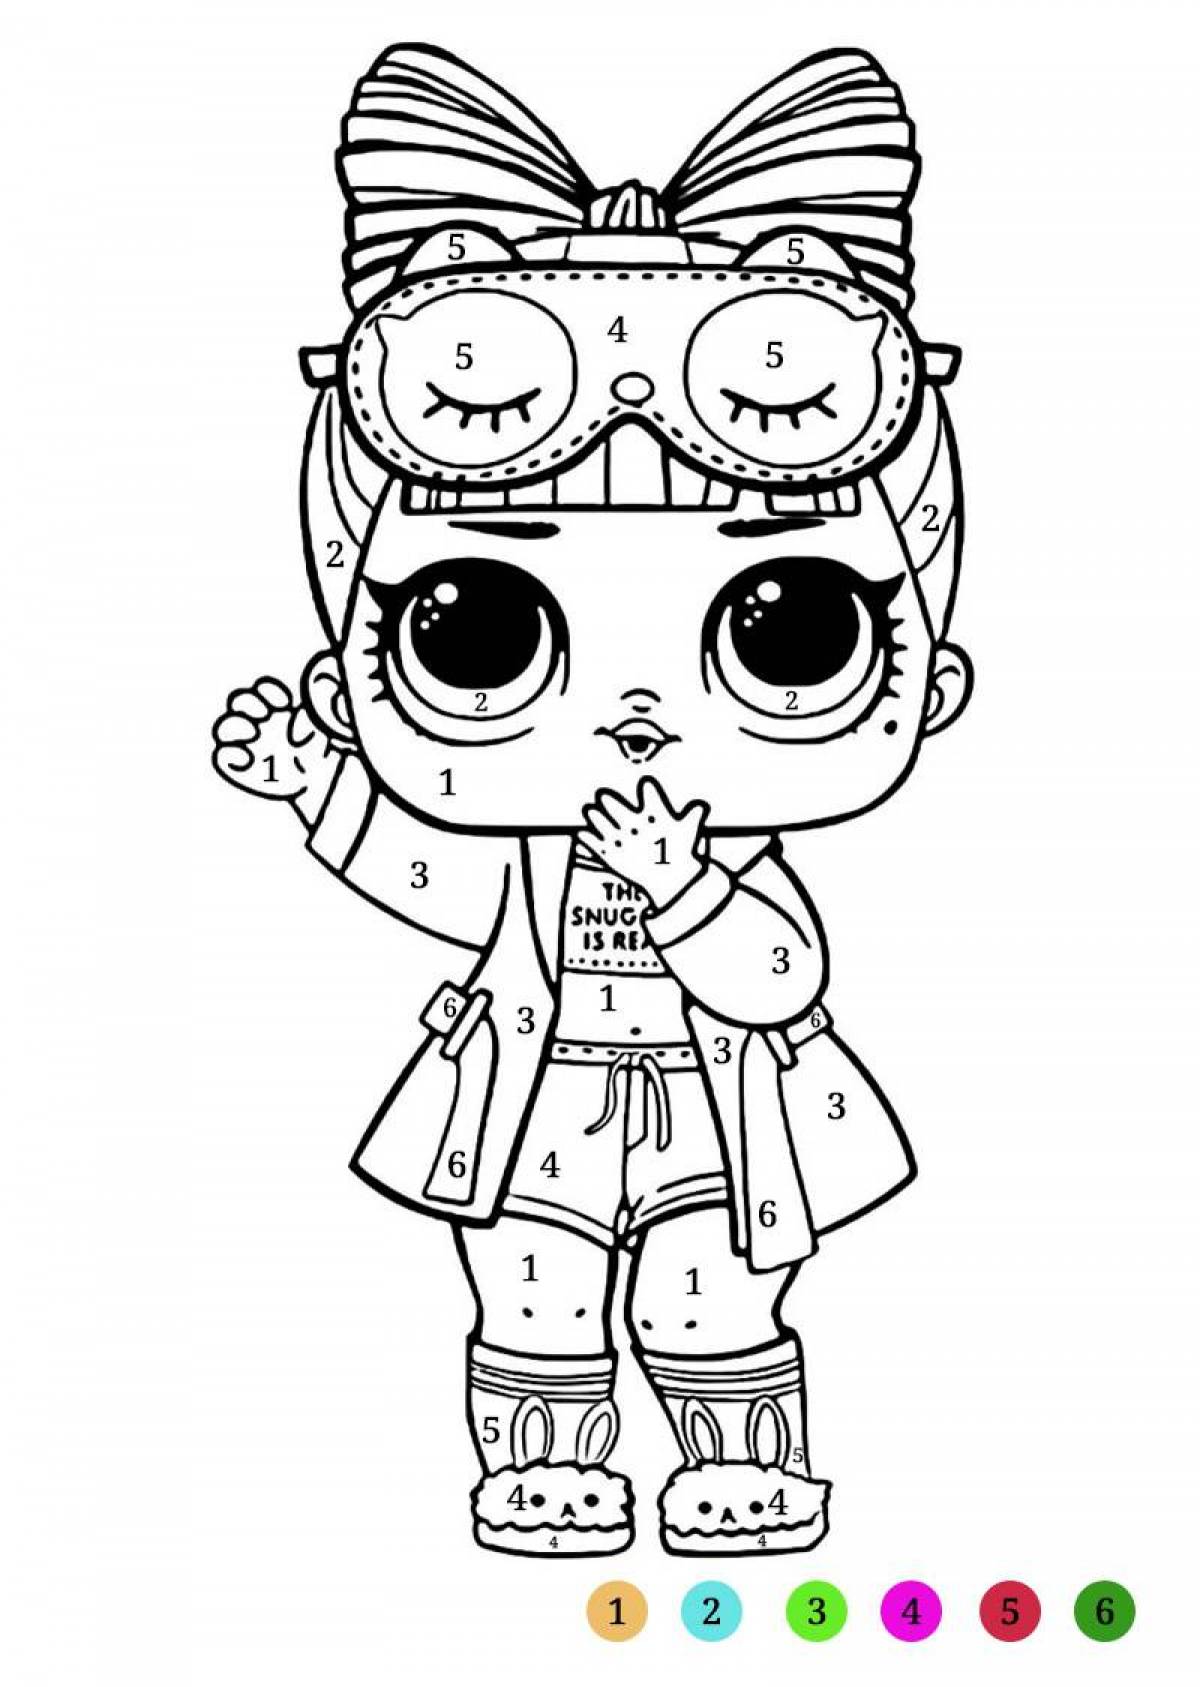 Cute lola dolls coloring pages for kids